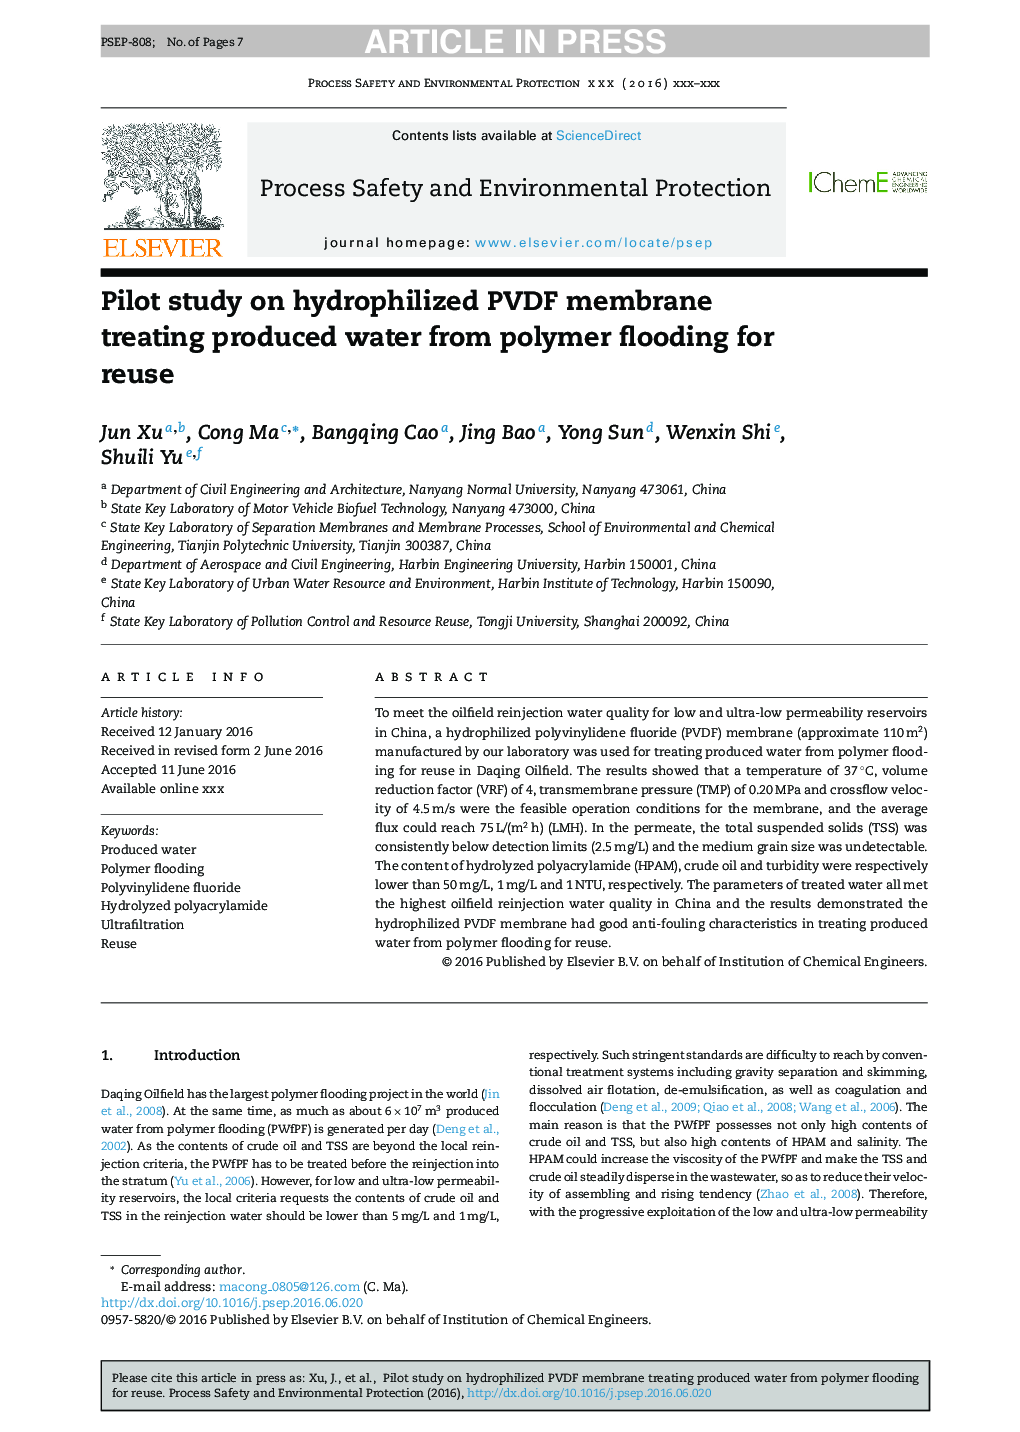 Pilot study on hydrophilized PVDF membrane treating produced water from polymer flooding for reuse